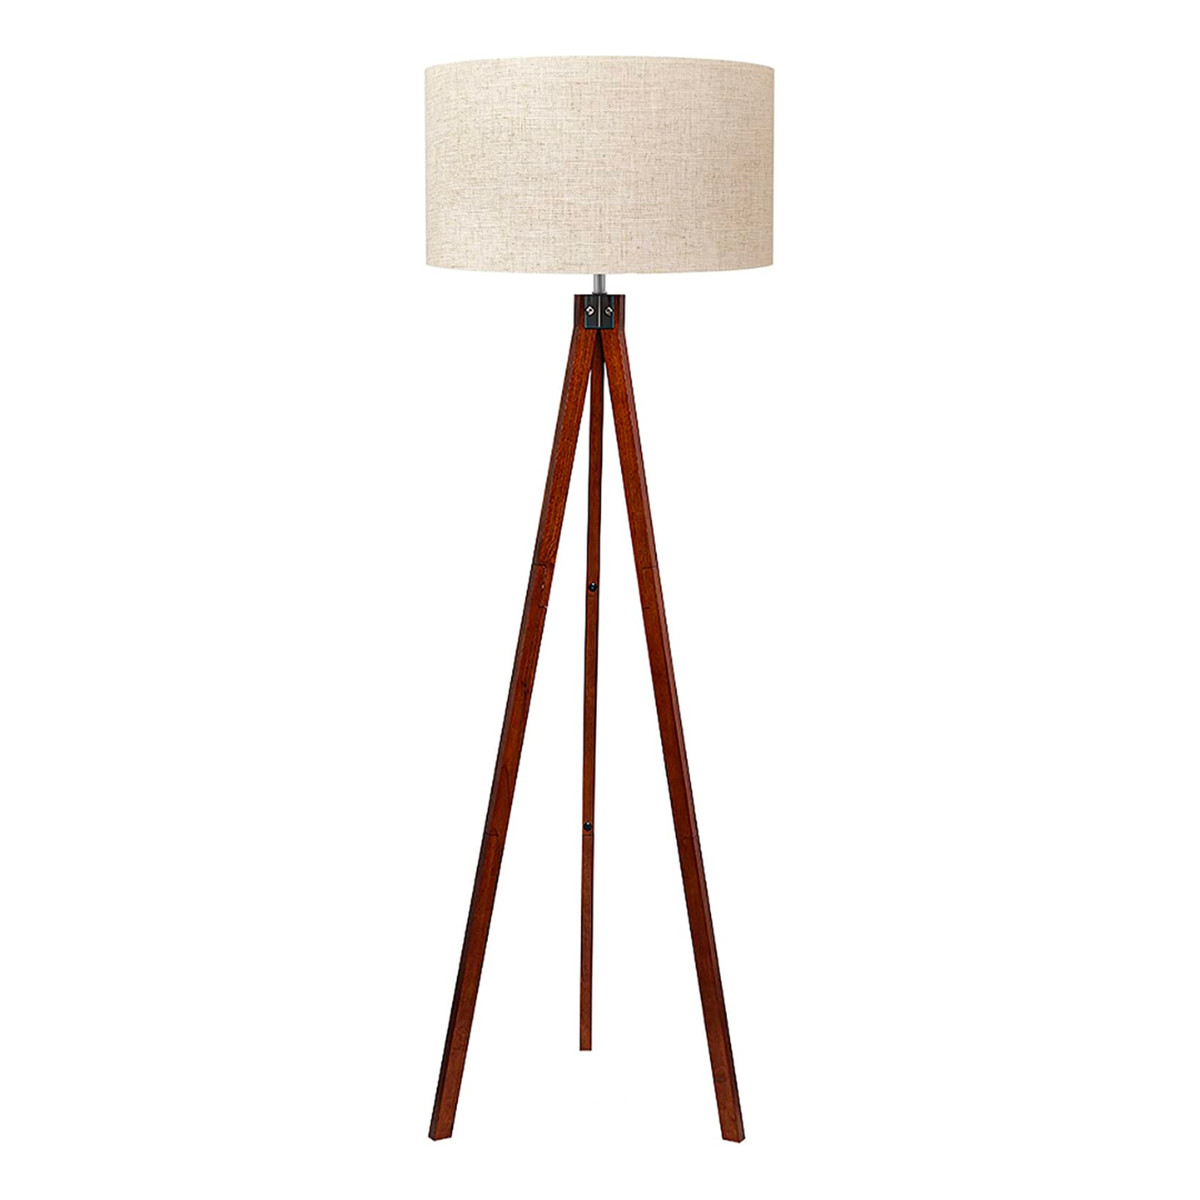 LEPOWER wooden tripod floor lamp with circular lampshade